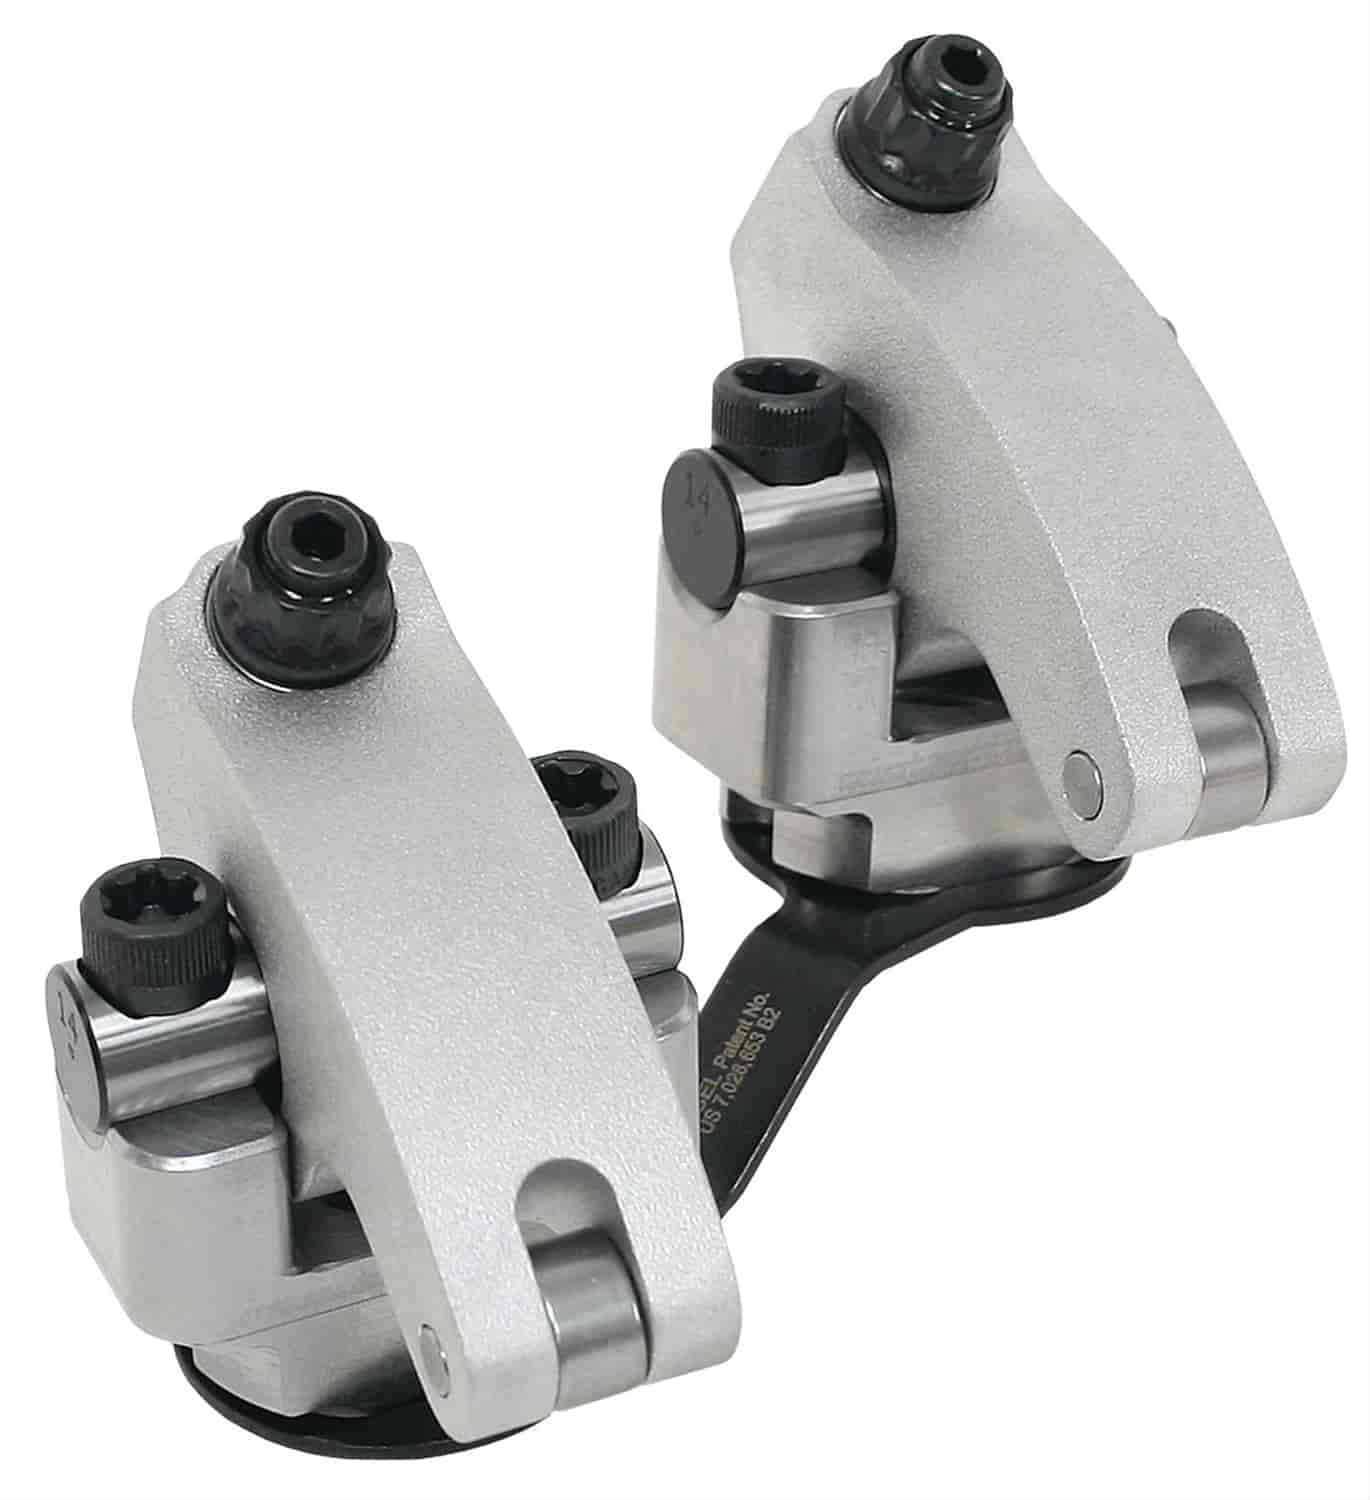 Series SS Shaft Mount Rockers Fits: Canfield 24.5-800 Series World Products Merlin/Aluminum Rocker Ratio: 1.8 IN / 1.8 EX